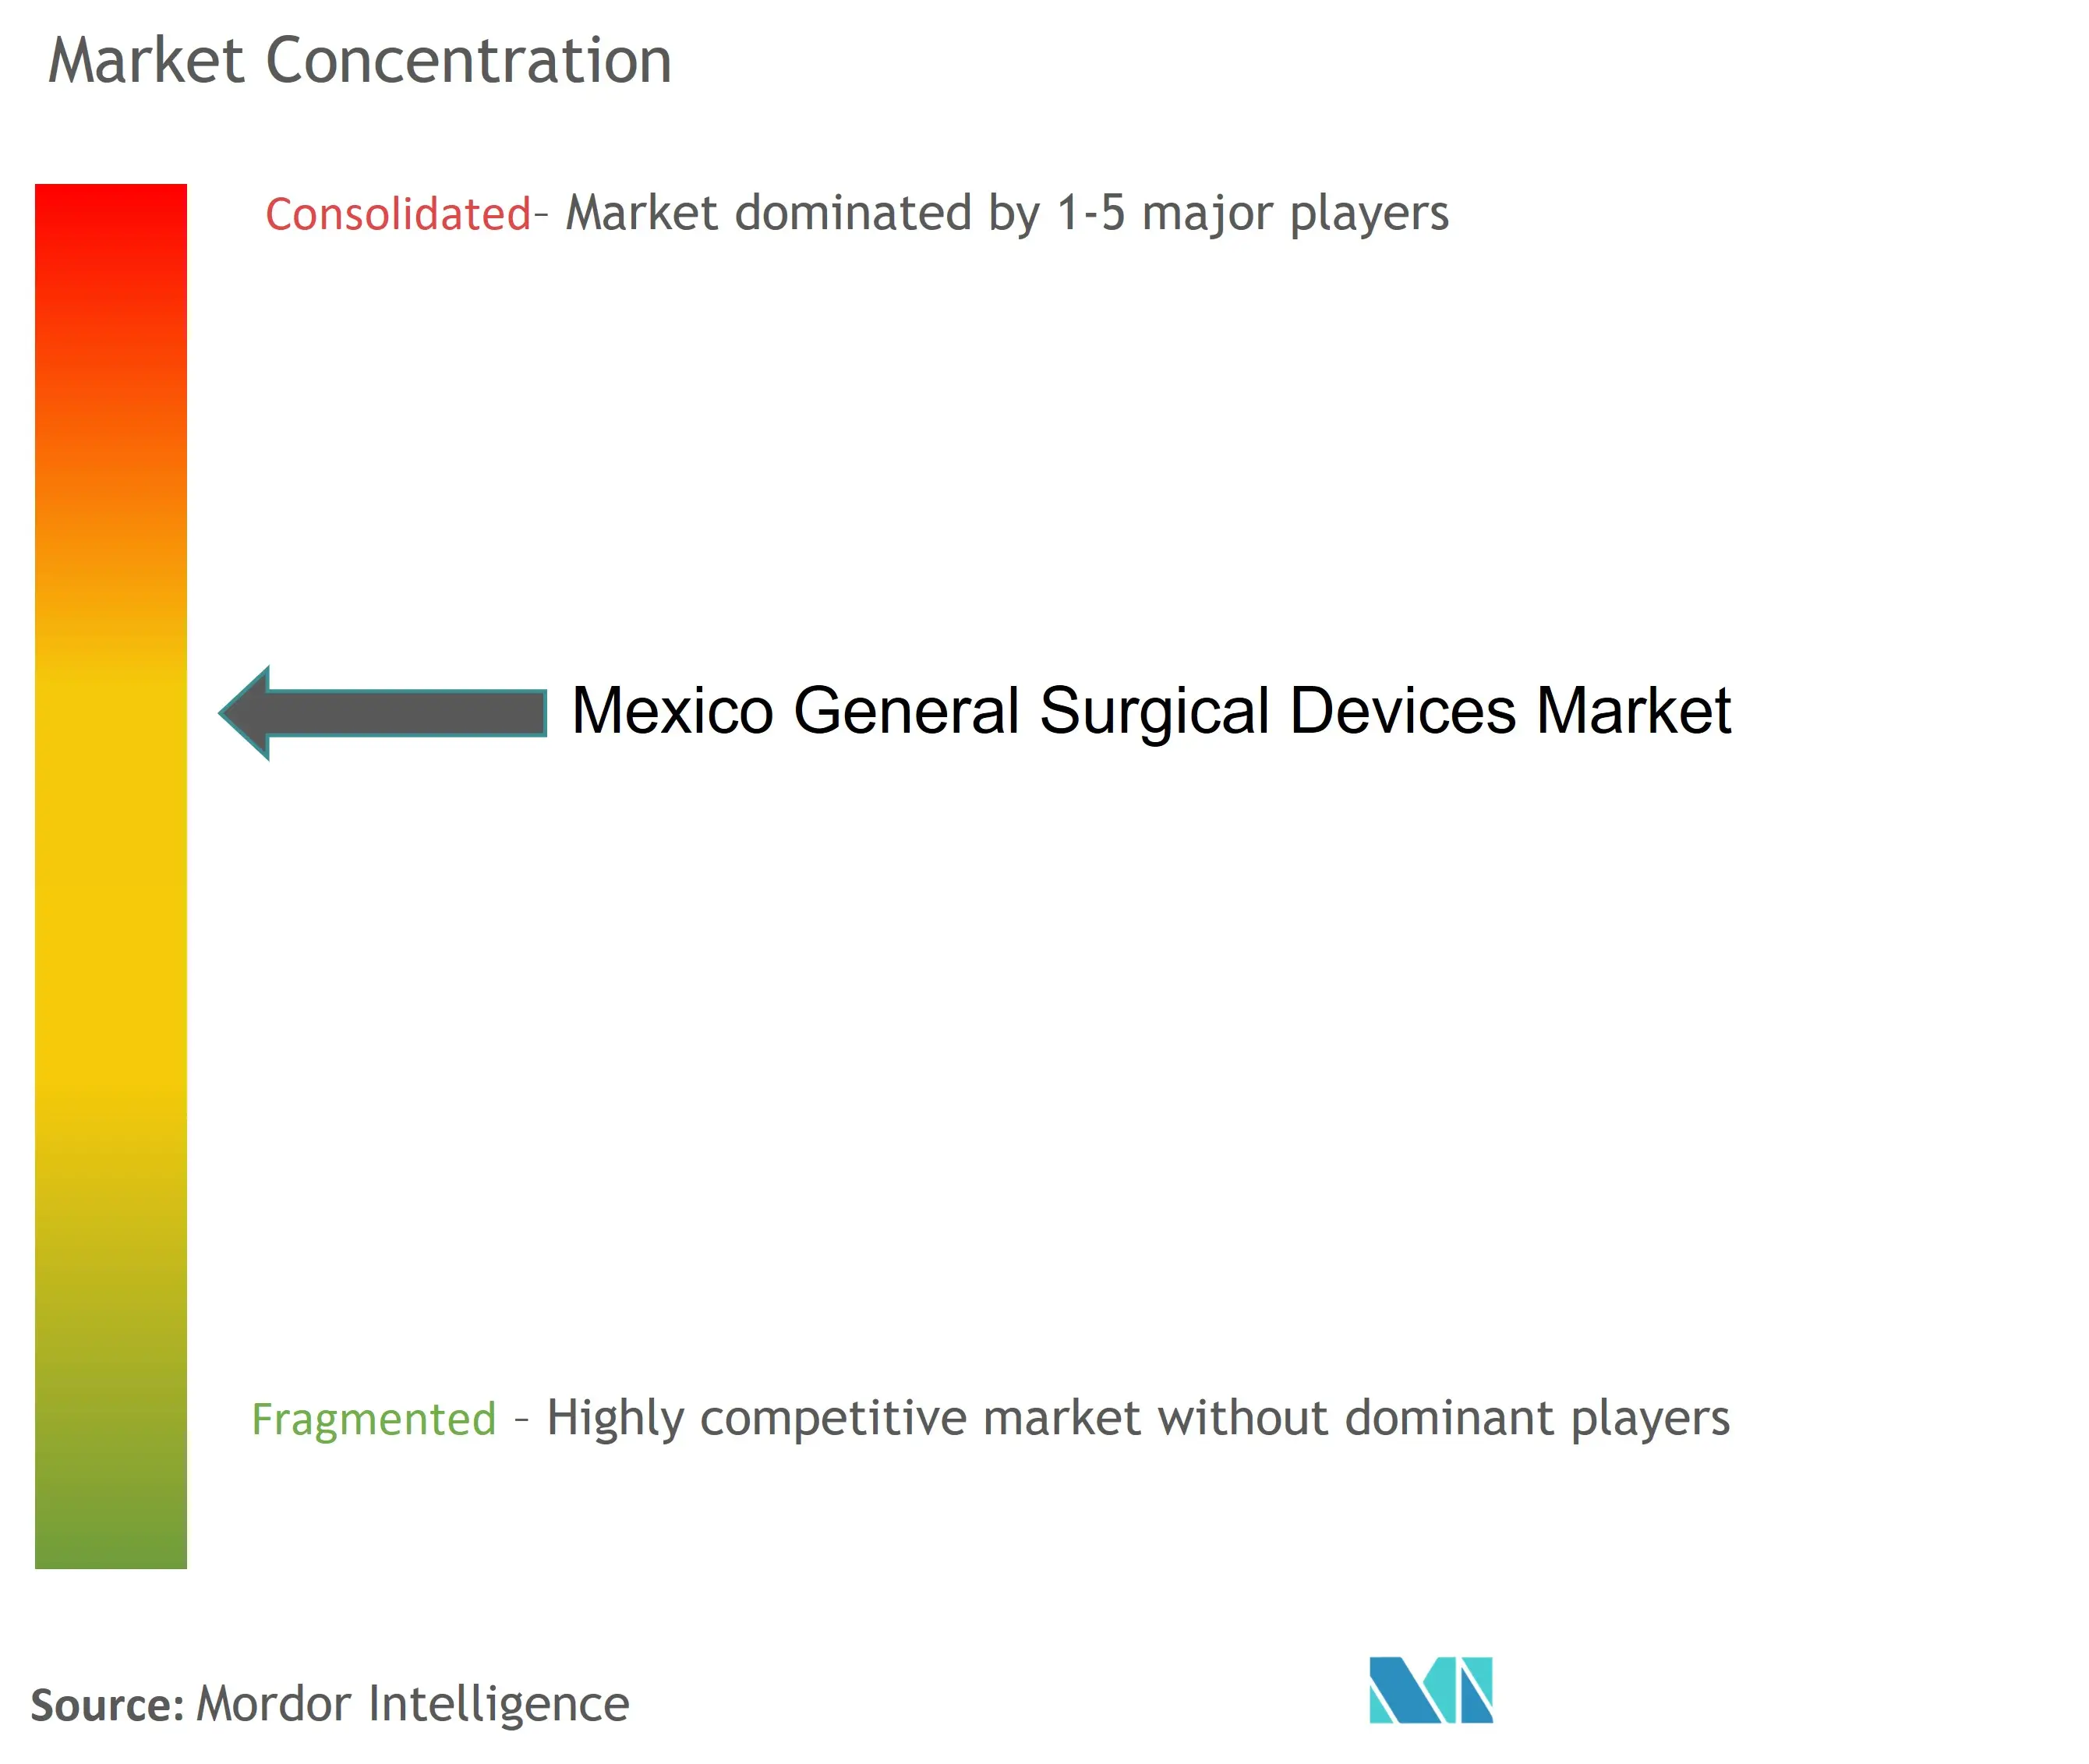 Mexico General Surgical Devices Market Concentration